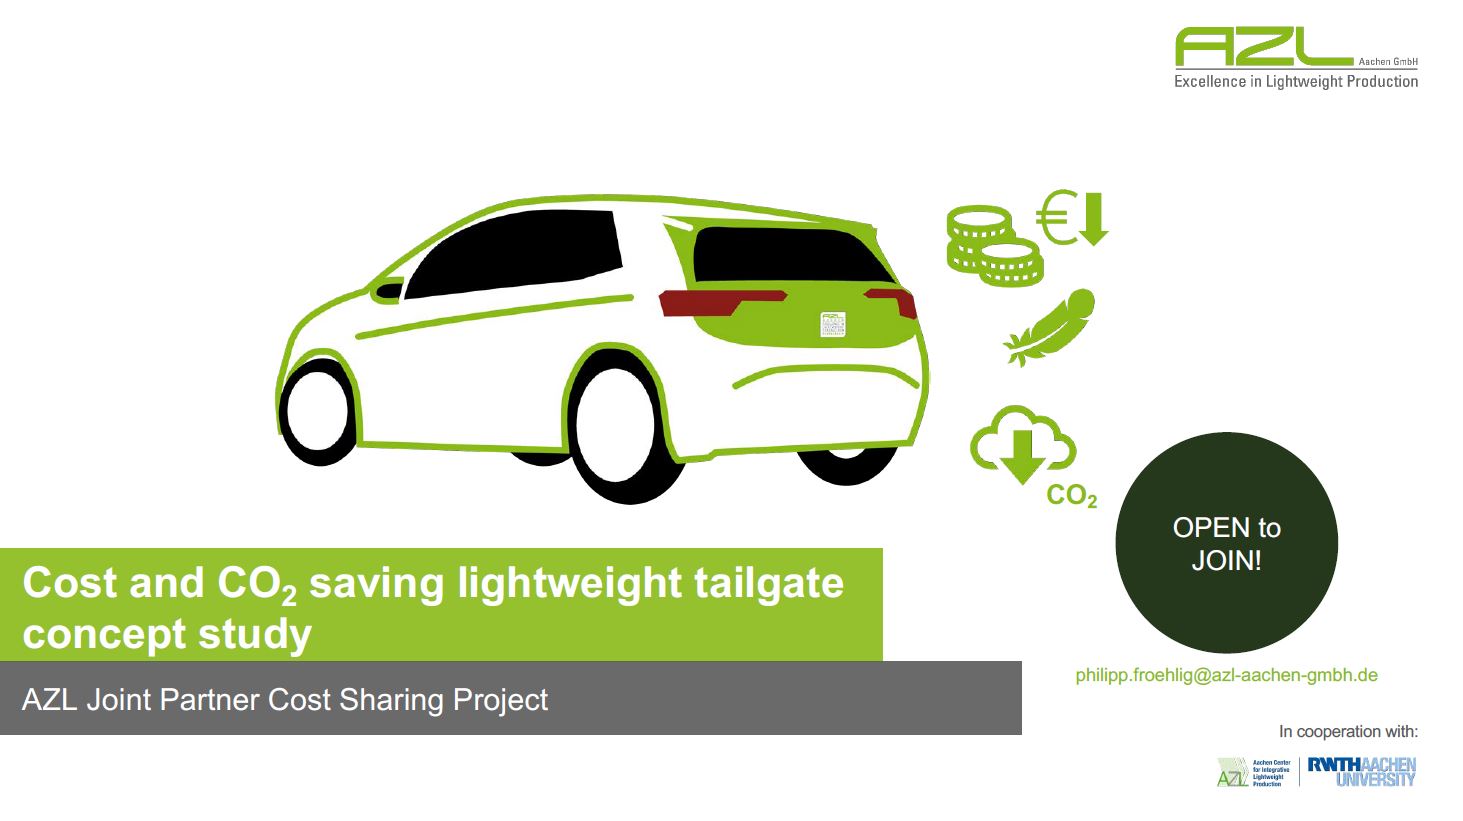 AZL Joint Partner Project Cost and CO 2 saving lightweight tailgate concept study